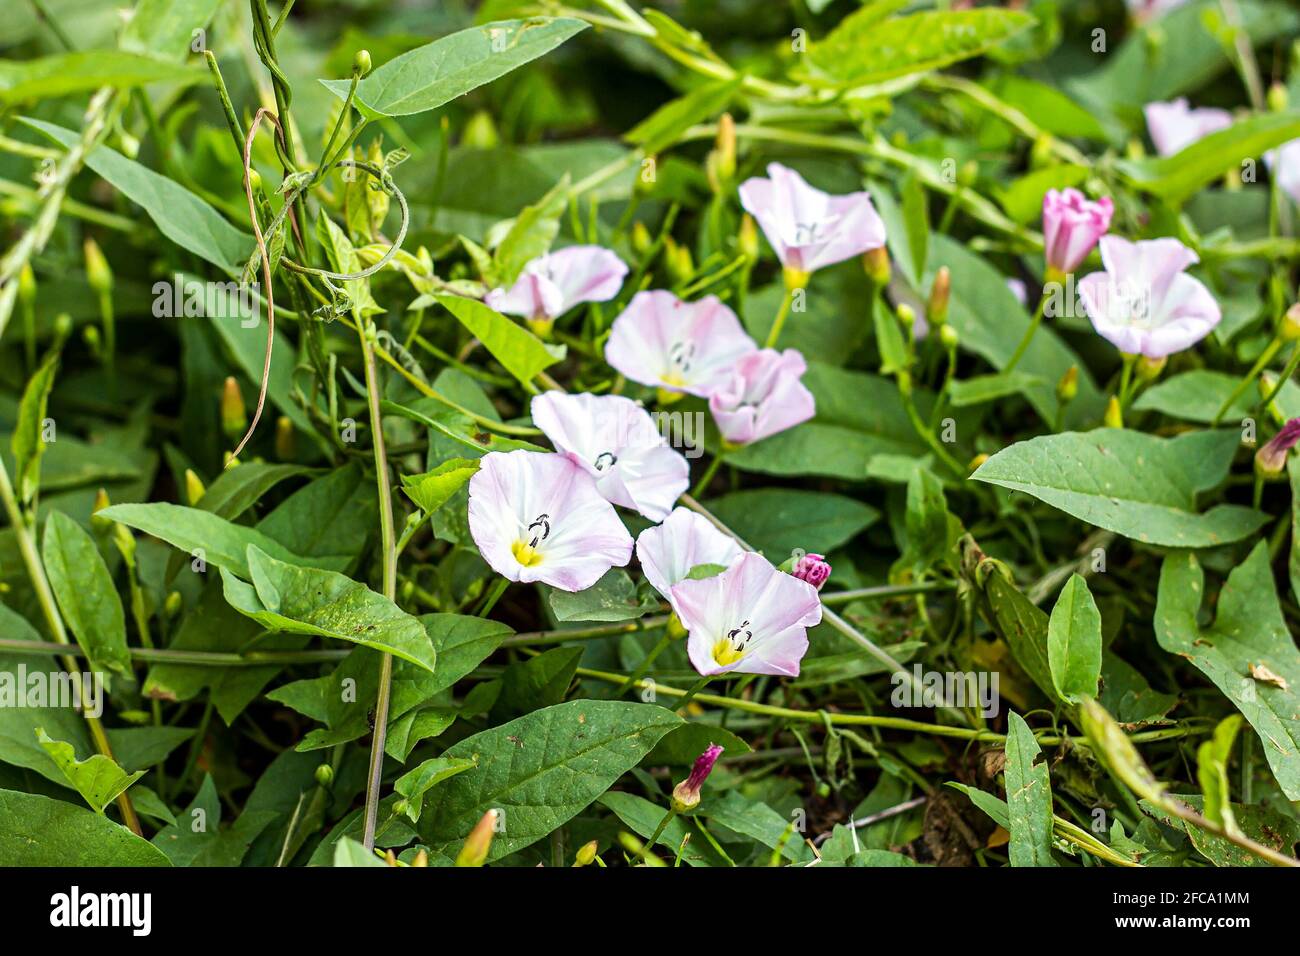 White and pink Morning Glory (Ipomoea Aquatica, False Bindweed, Water Spinach, Kangkong, River Spinach, Ong Choy, Water Convolvulus, Swamp Cabbage) fl Stock Photo